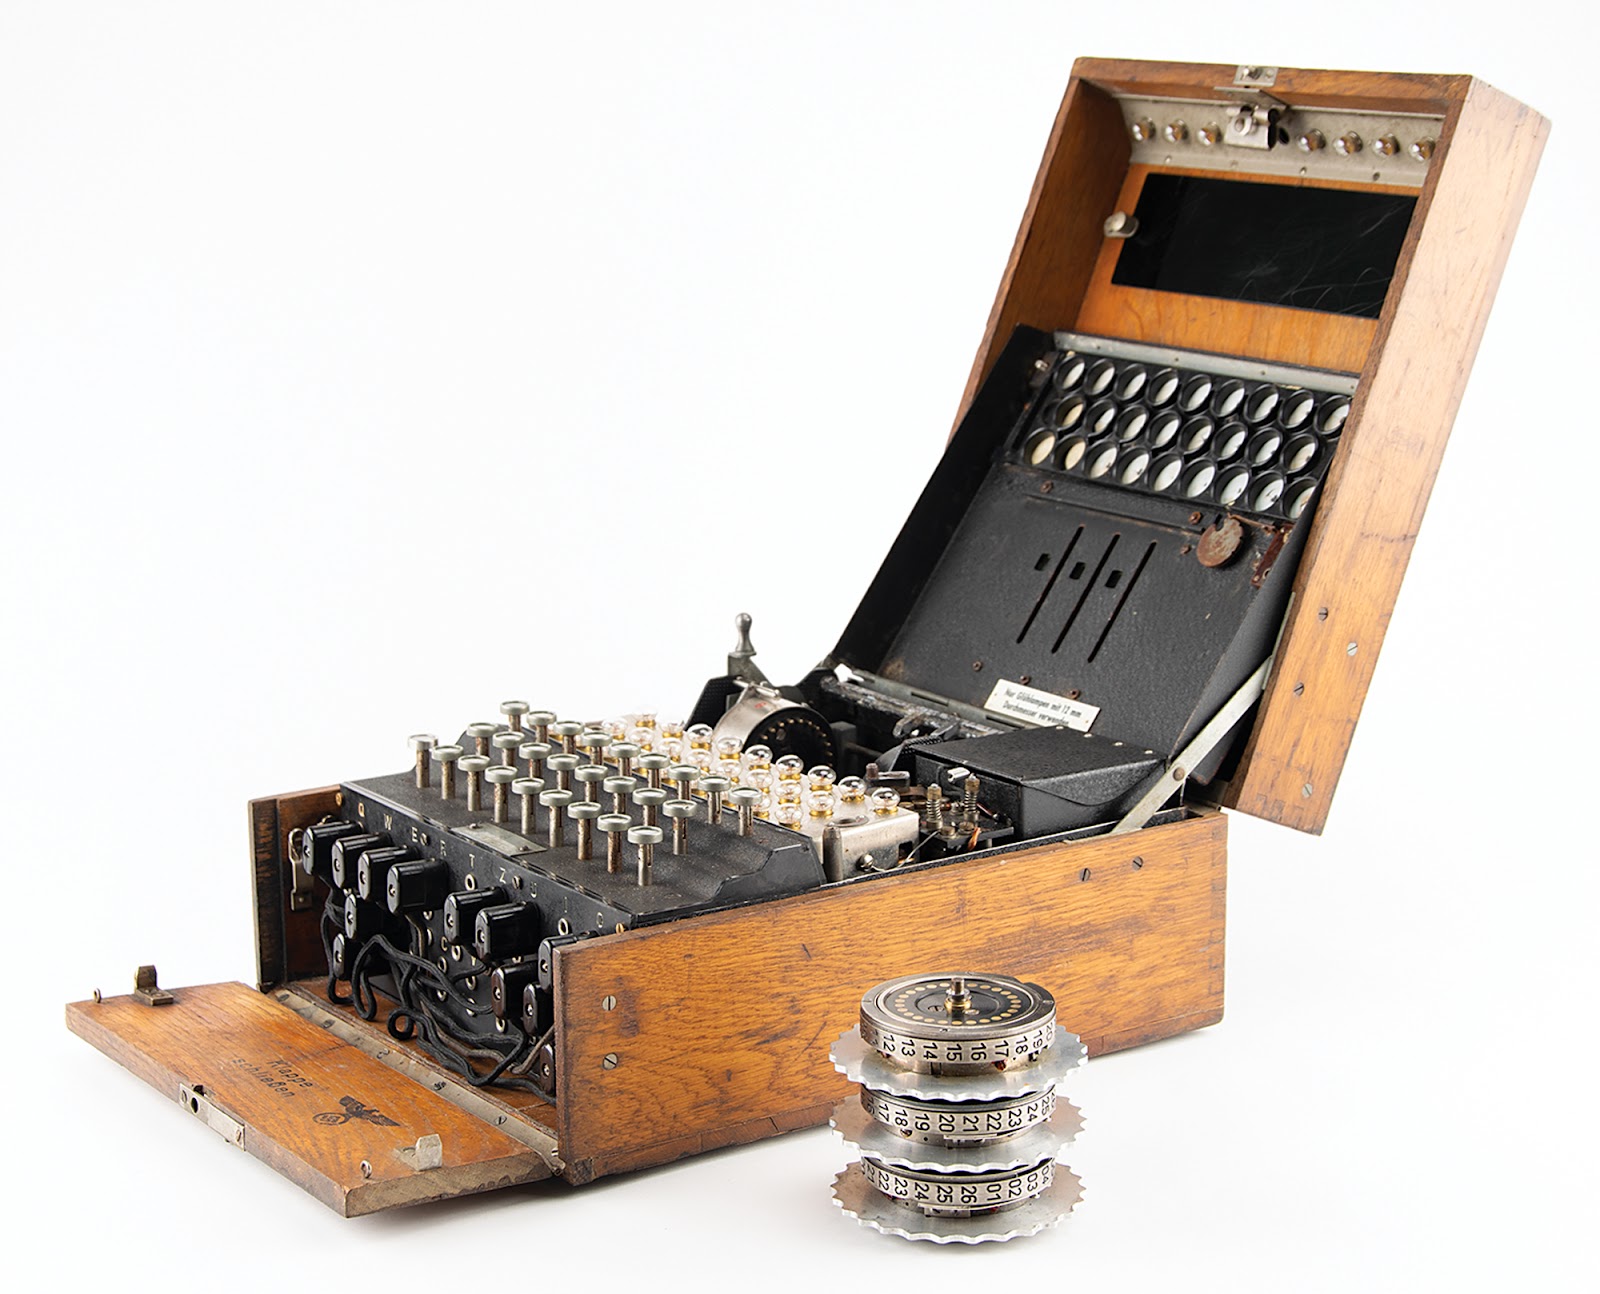 Fully functional, circa 1943 WWII German Enigma I cipher machine.